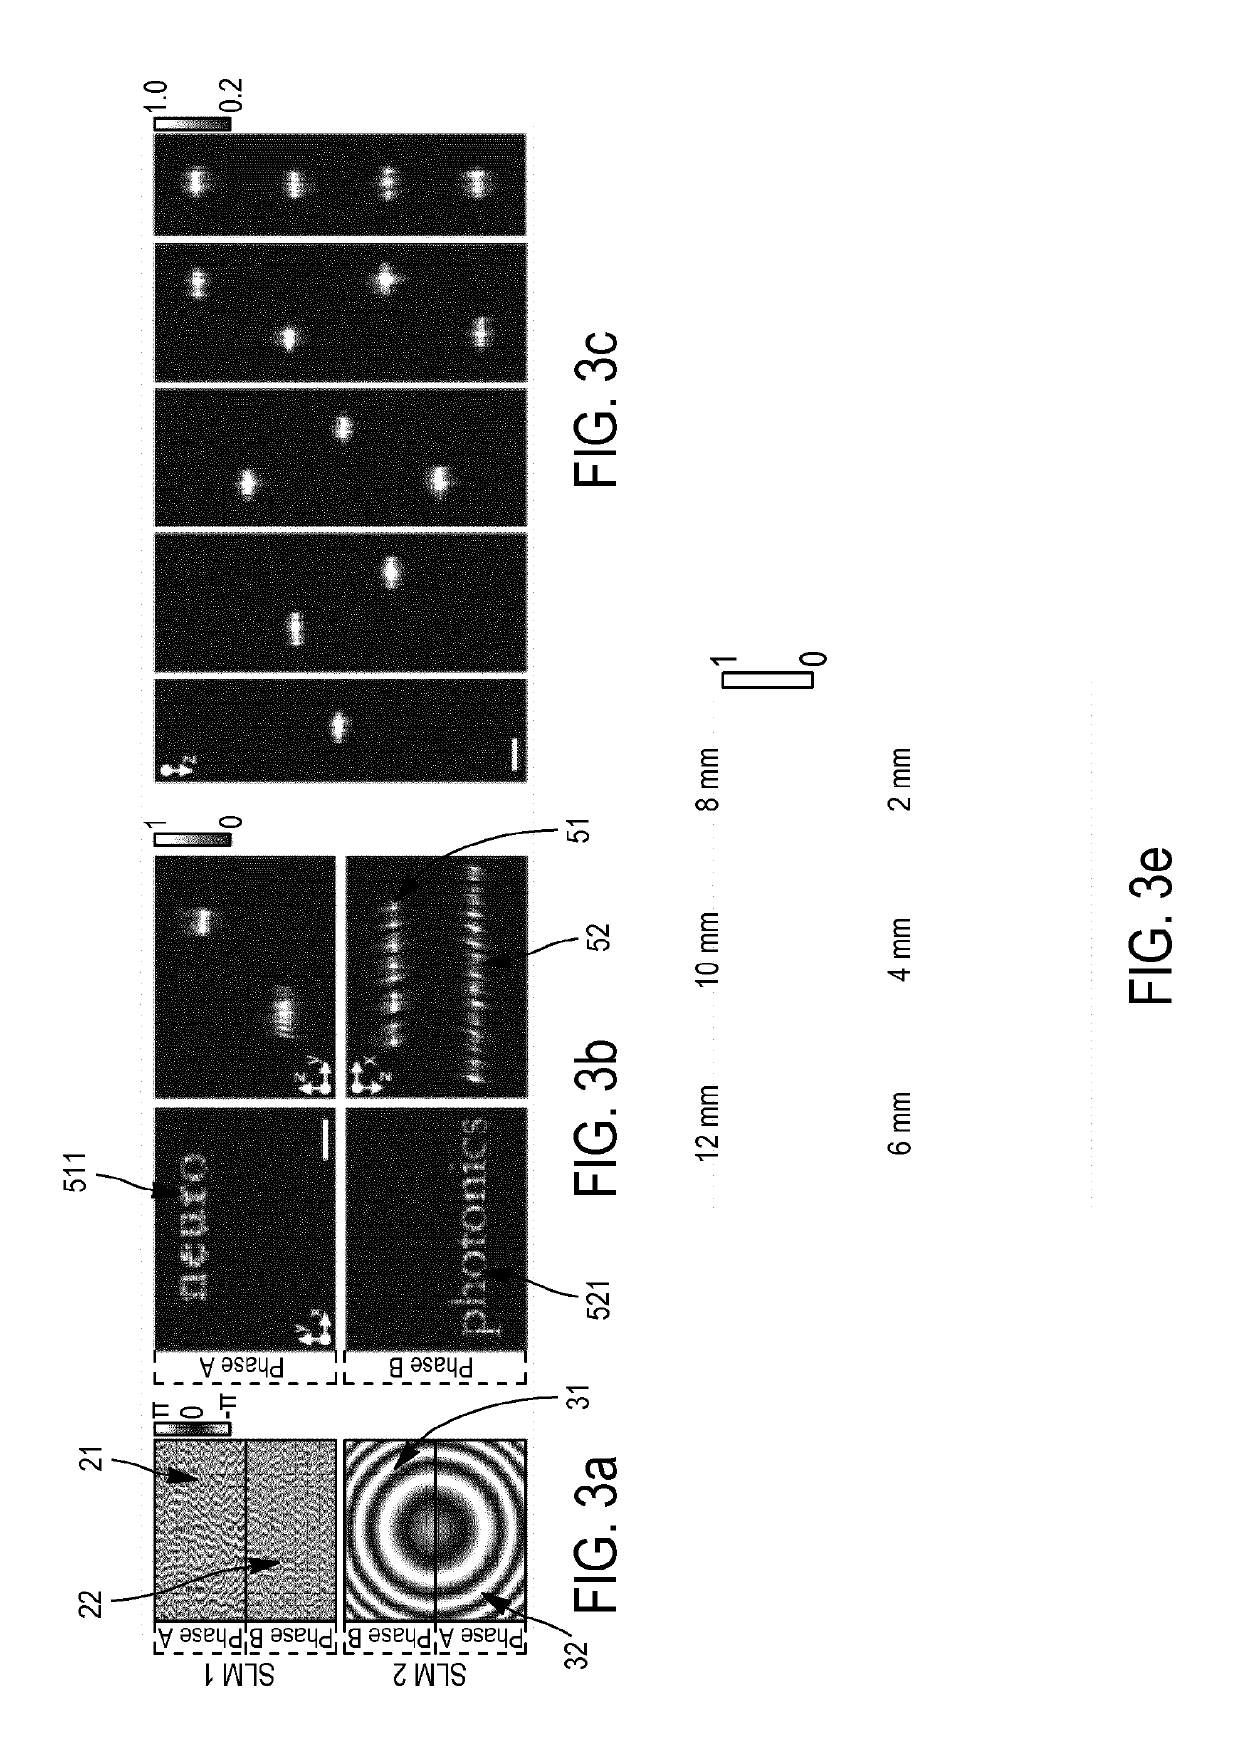 Optical system for shaping the wavefront of the electric field of an input light beam